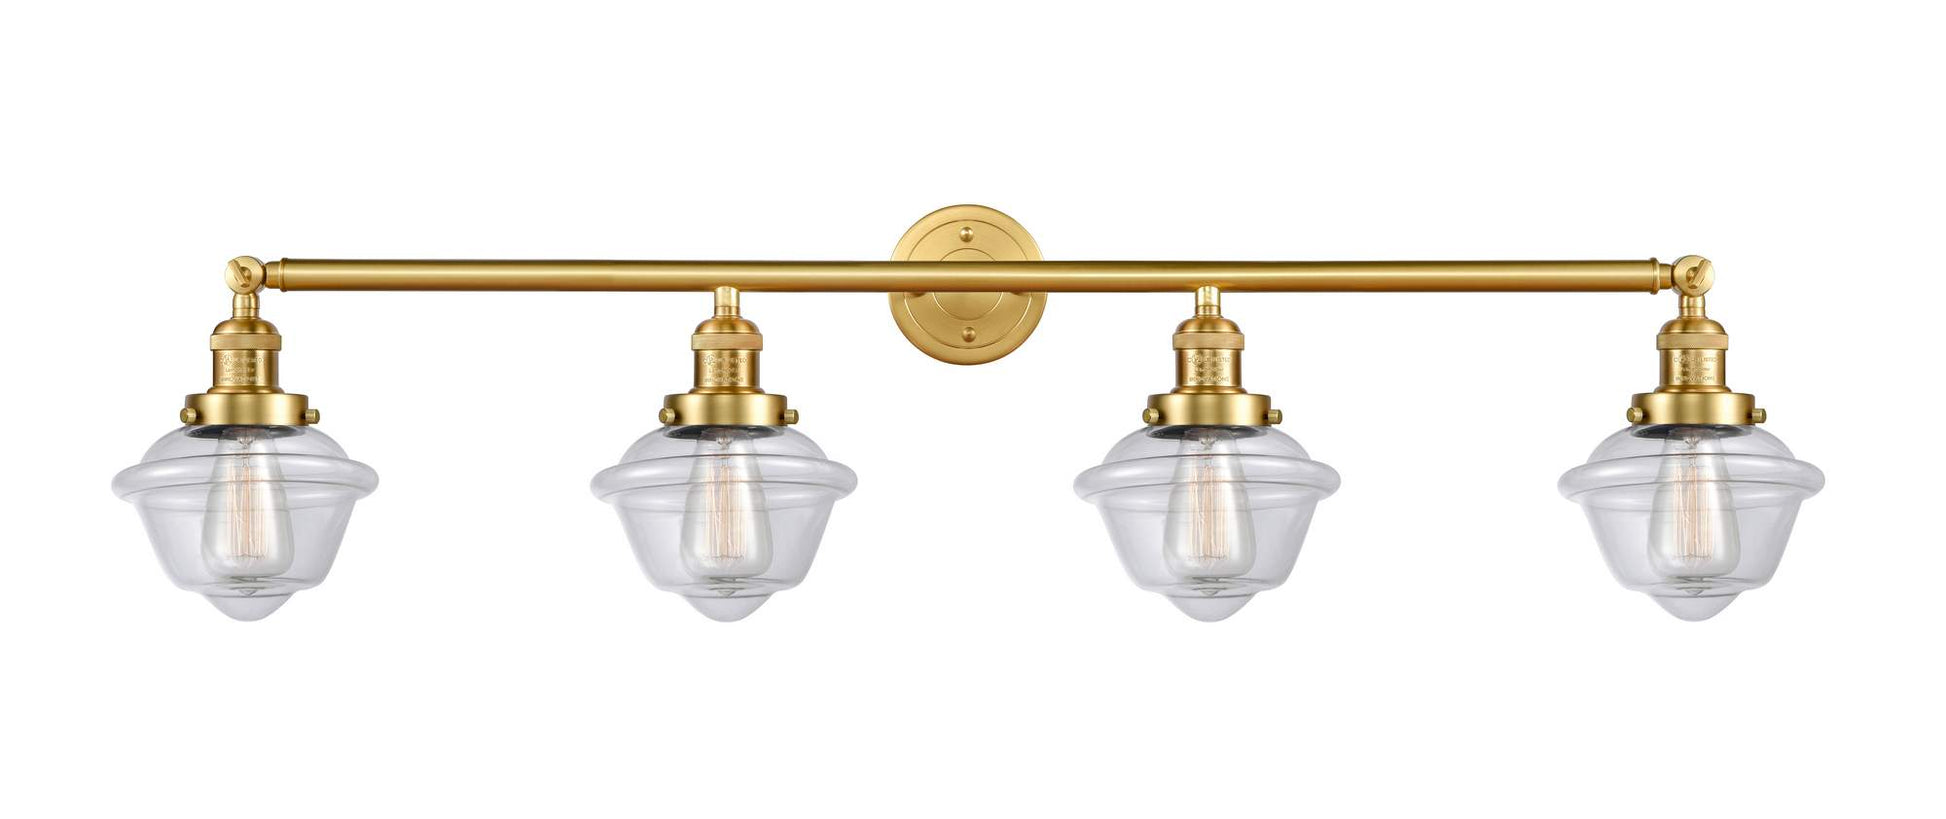 215-SG-G532 4-Light 46" Satin Gold Bath Vanity Light - Clear Small Oxford Glass - LED Bulb - Dimmensions: 46 x 9 x 10 - Glass Up or Down: Yes